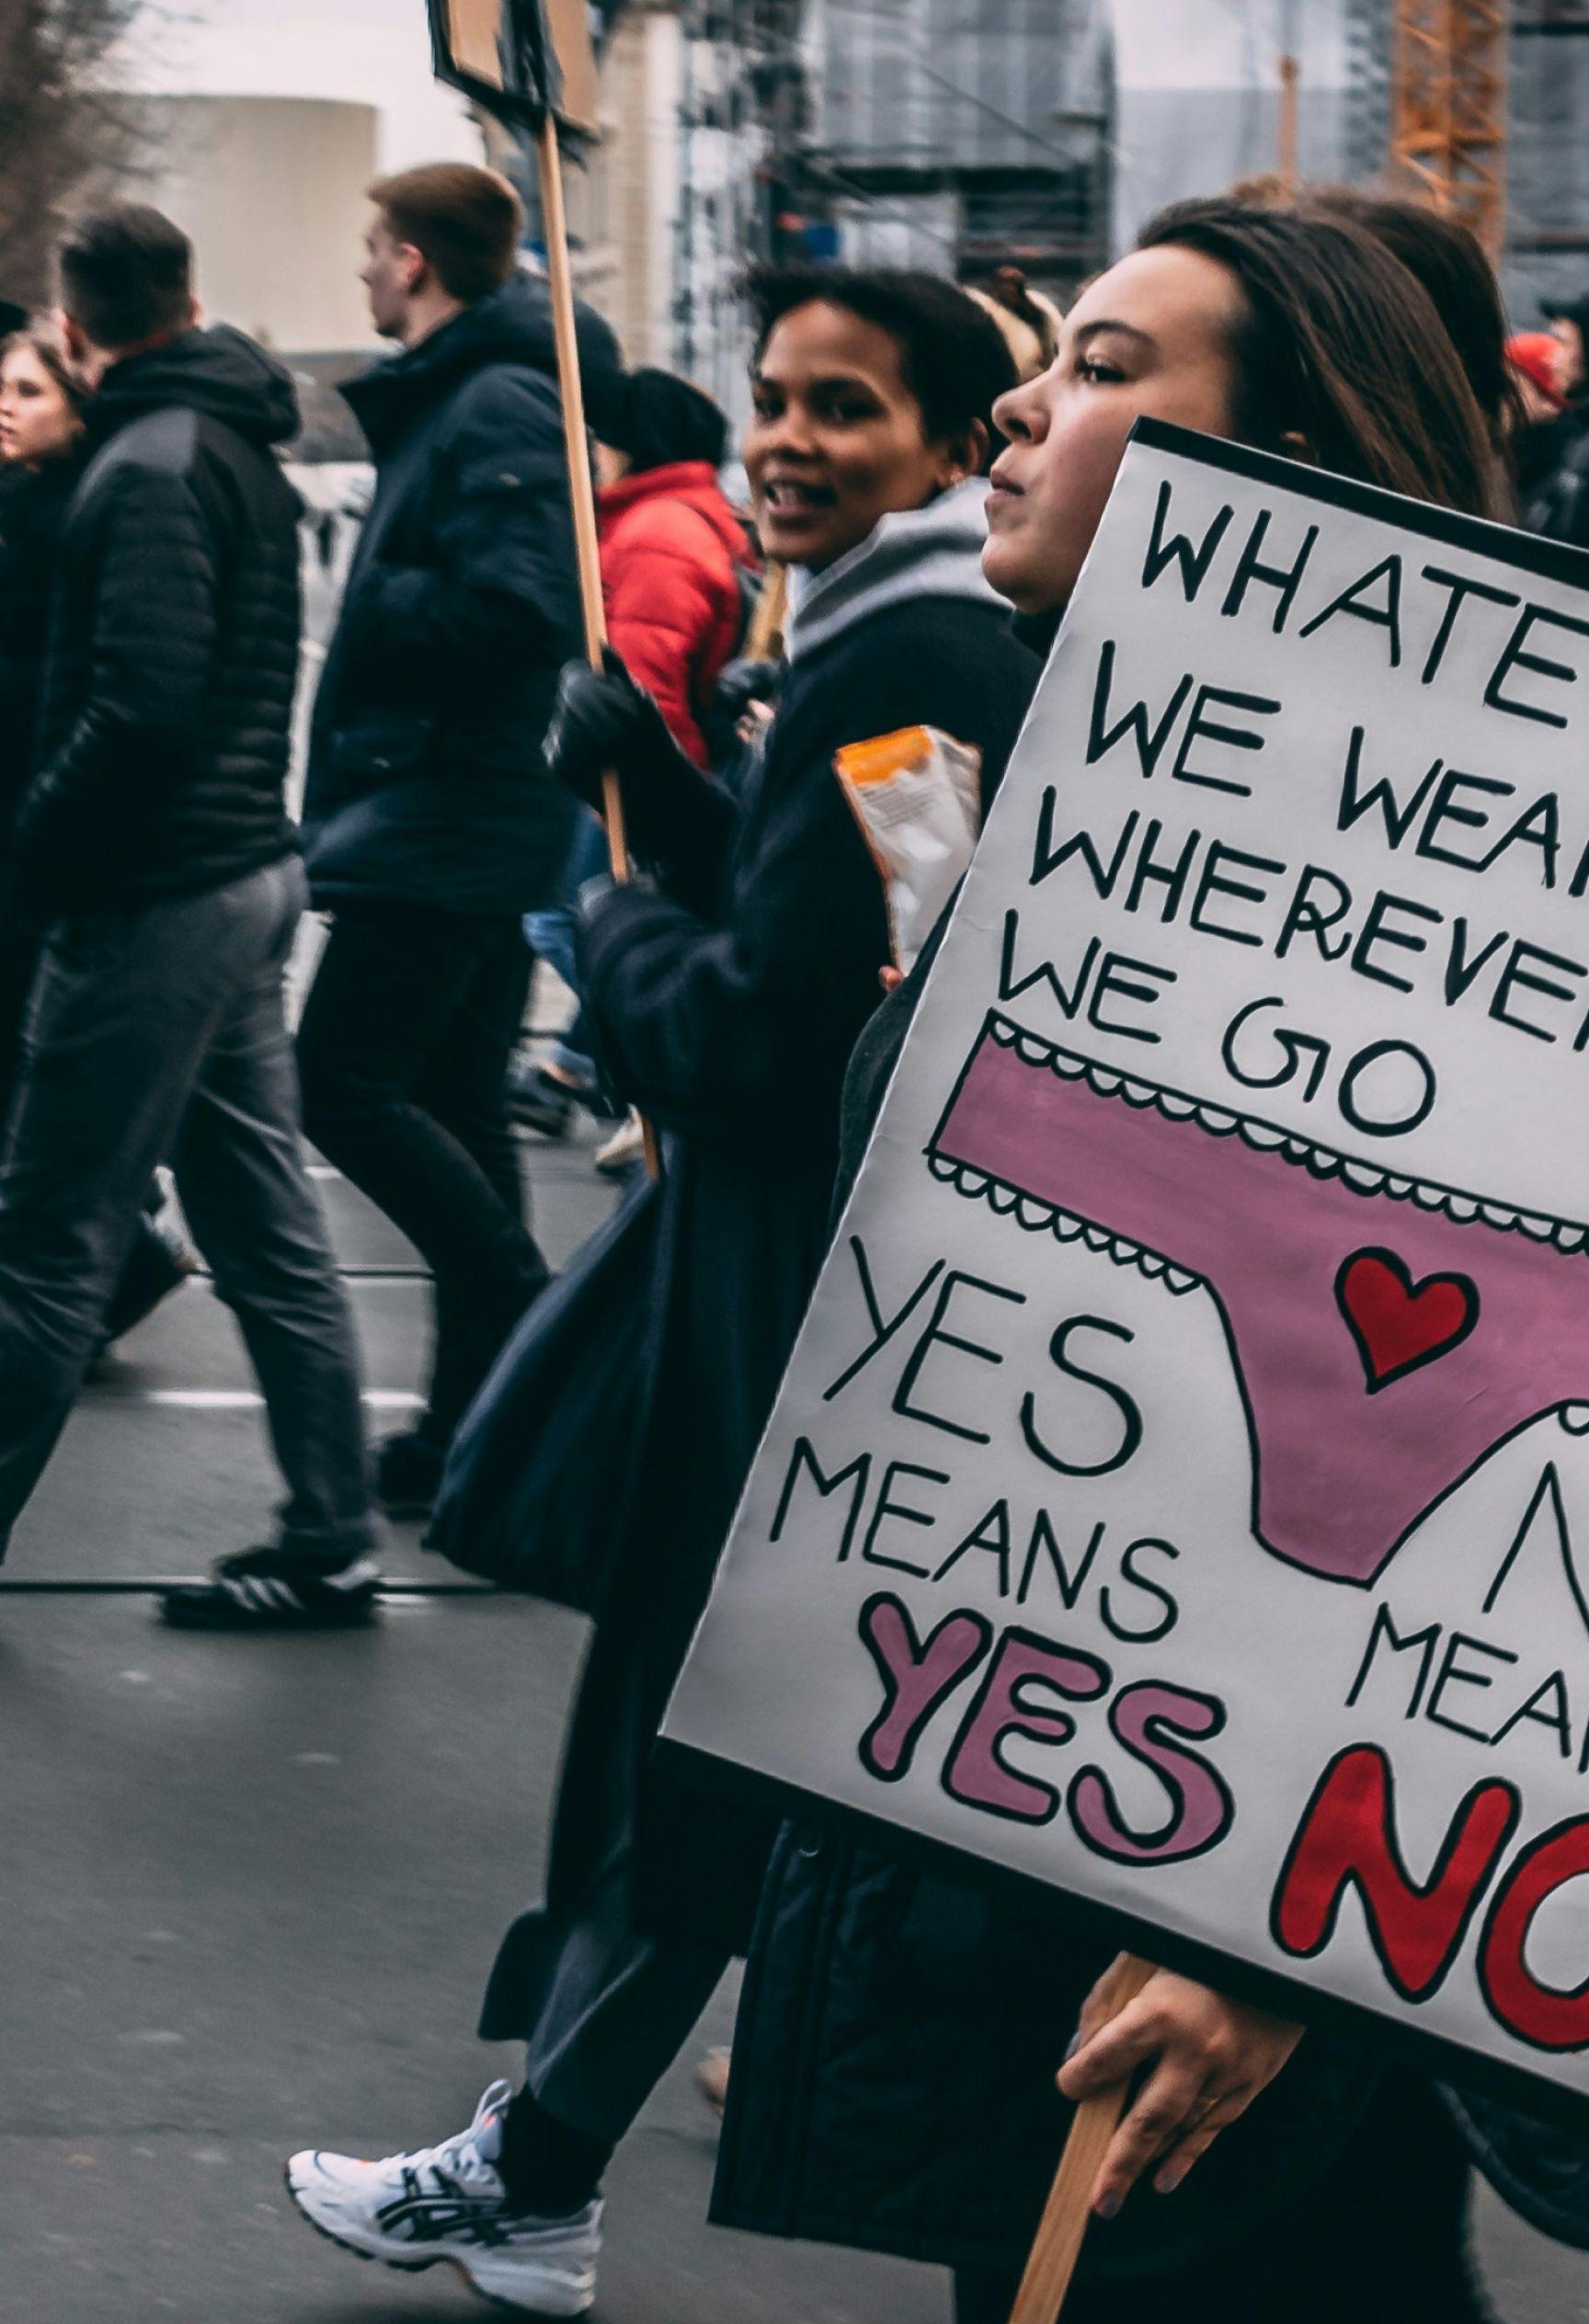 An image from Women's march in Berlin. 8th March 2020. A woman at the front holds a sign that reads "Whatever we wear, Wherever we go, Yes means yes, No means no."